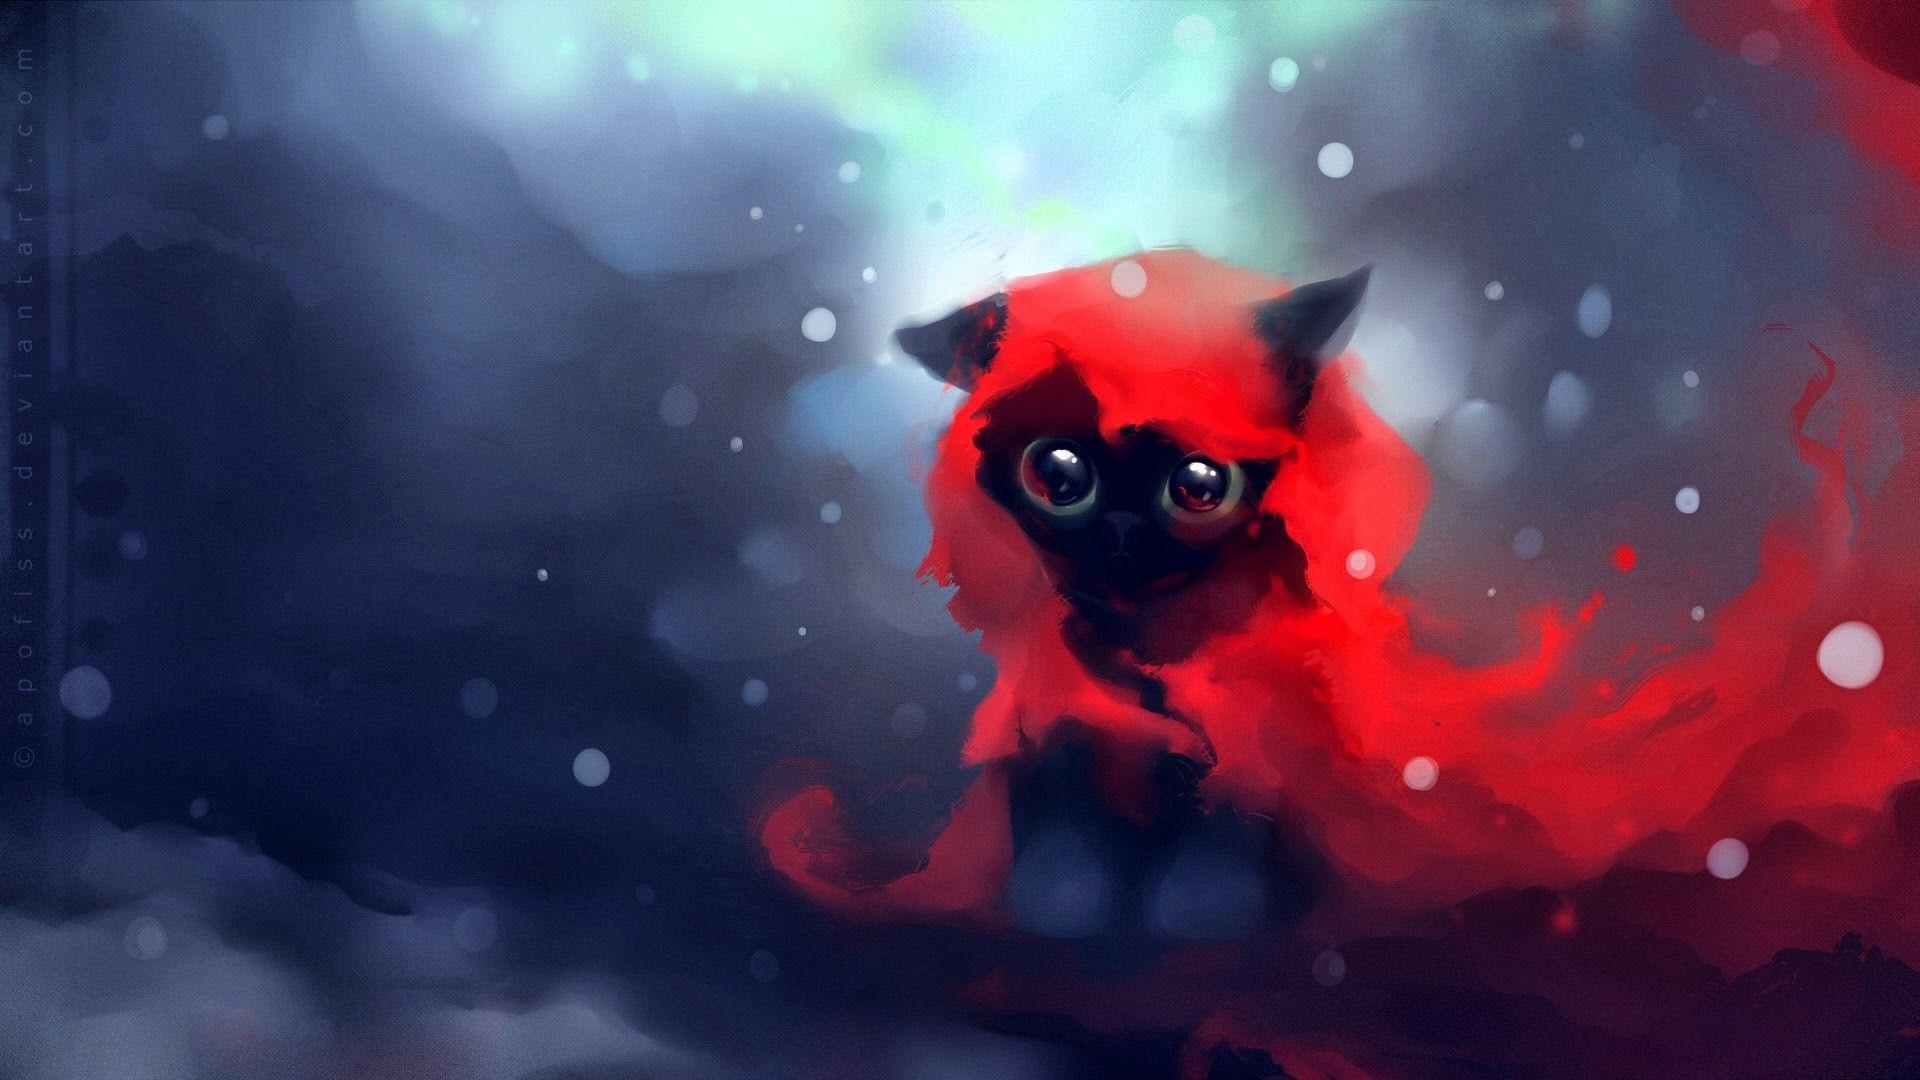 Anime Cat Wallpapers - Wallpaper Cave